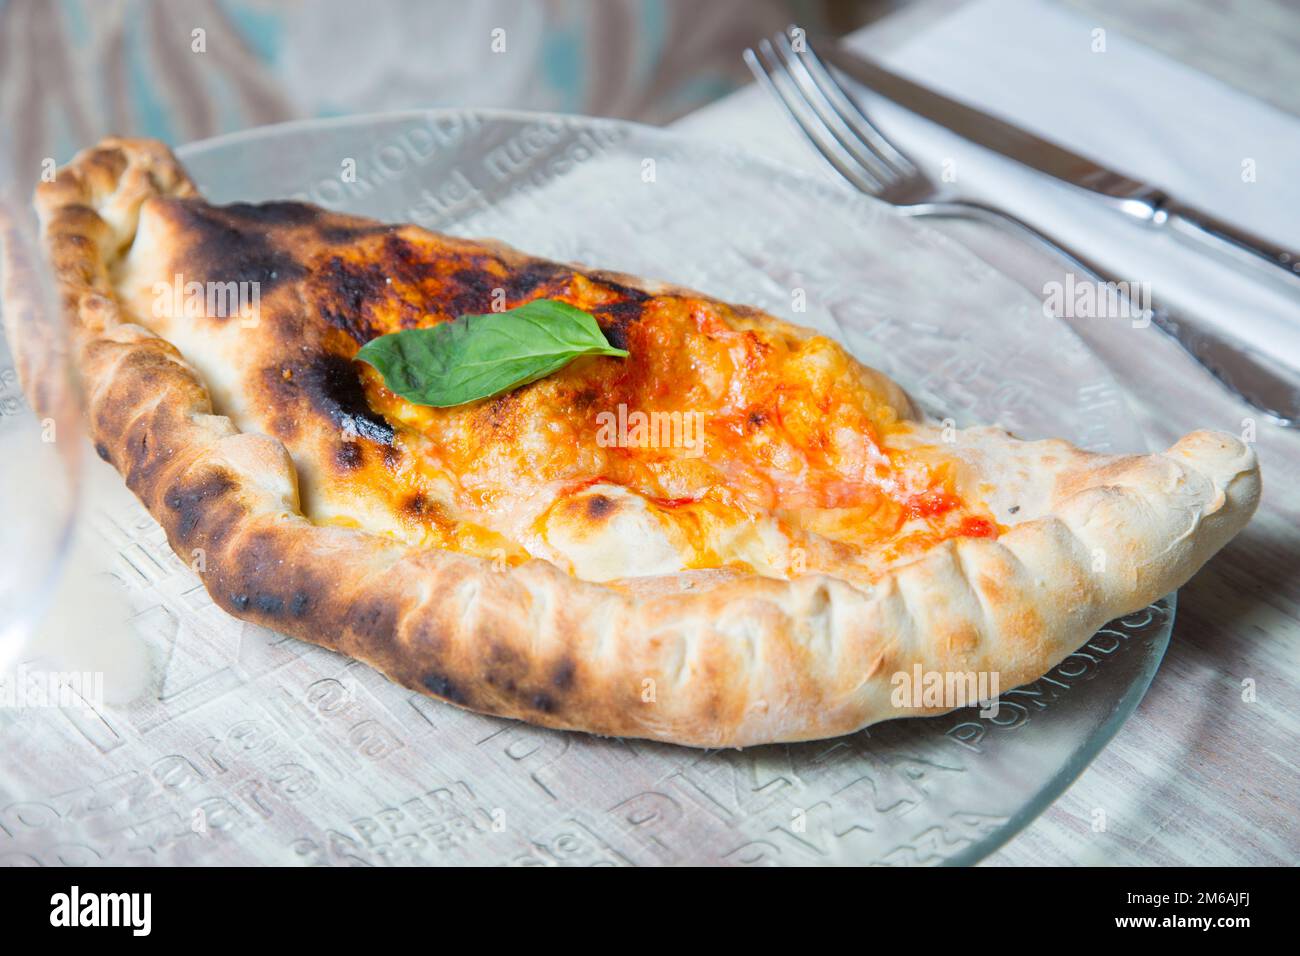 Calzone Pizza. Neapolitan pizza stuffed with cheese, tomato and other ingredients such as meat or vegetables. Authentic Italian recipe. Stock Photo